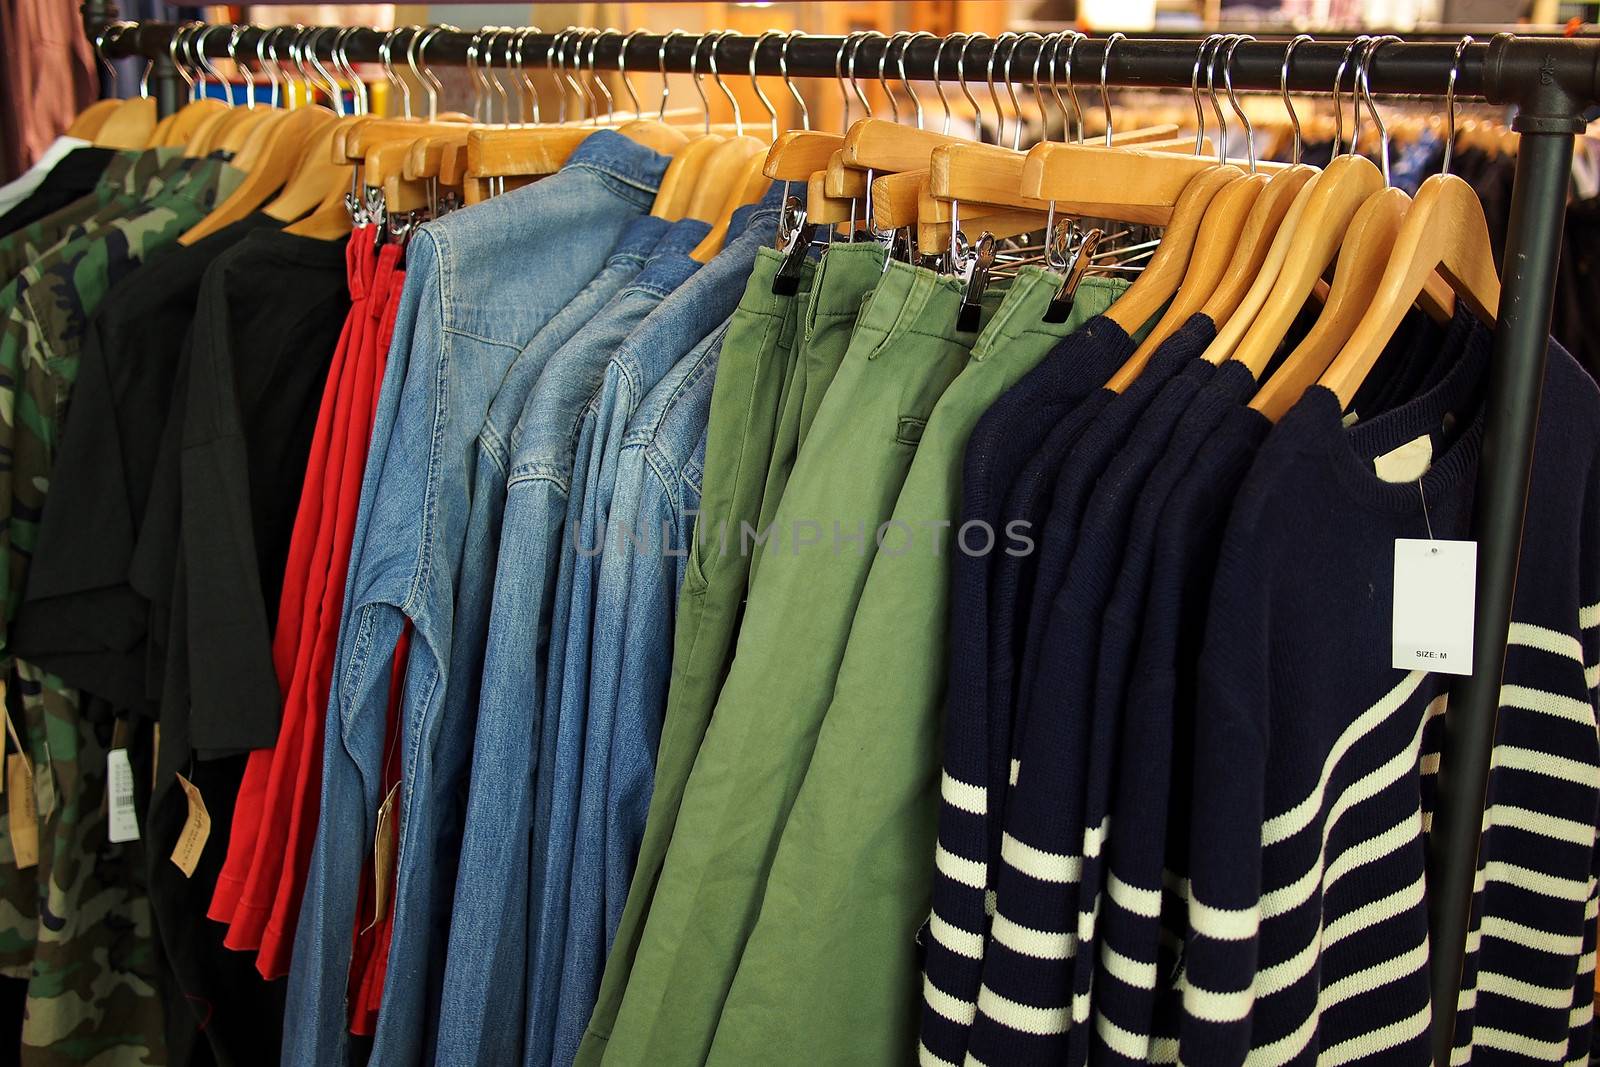 Fashion clothing on hangers in a shop by stockyimages